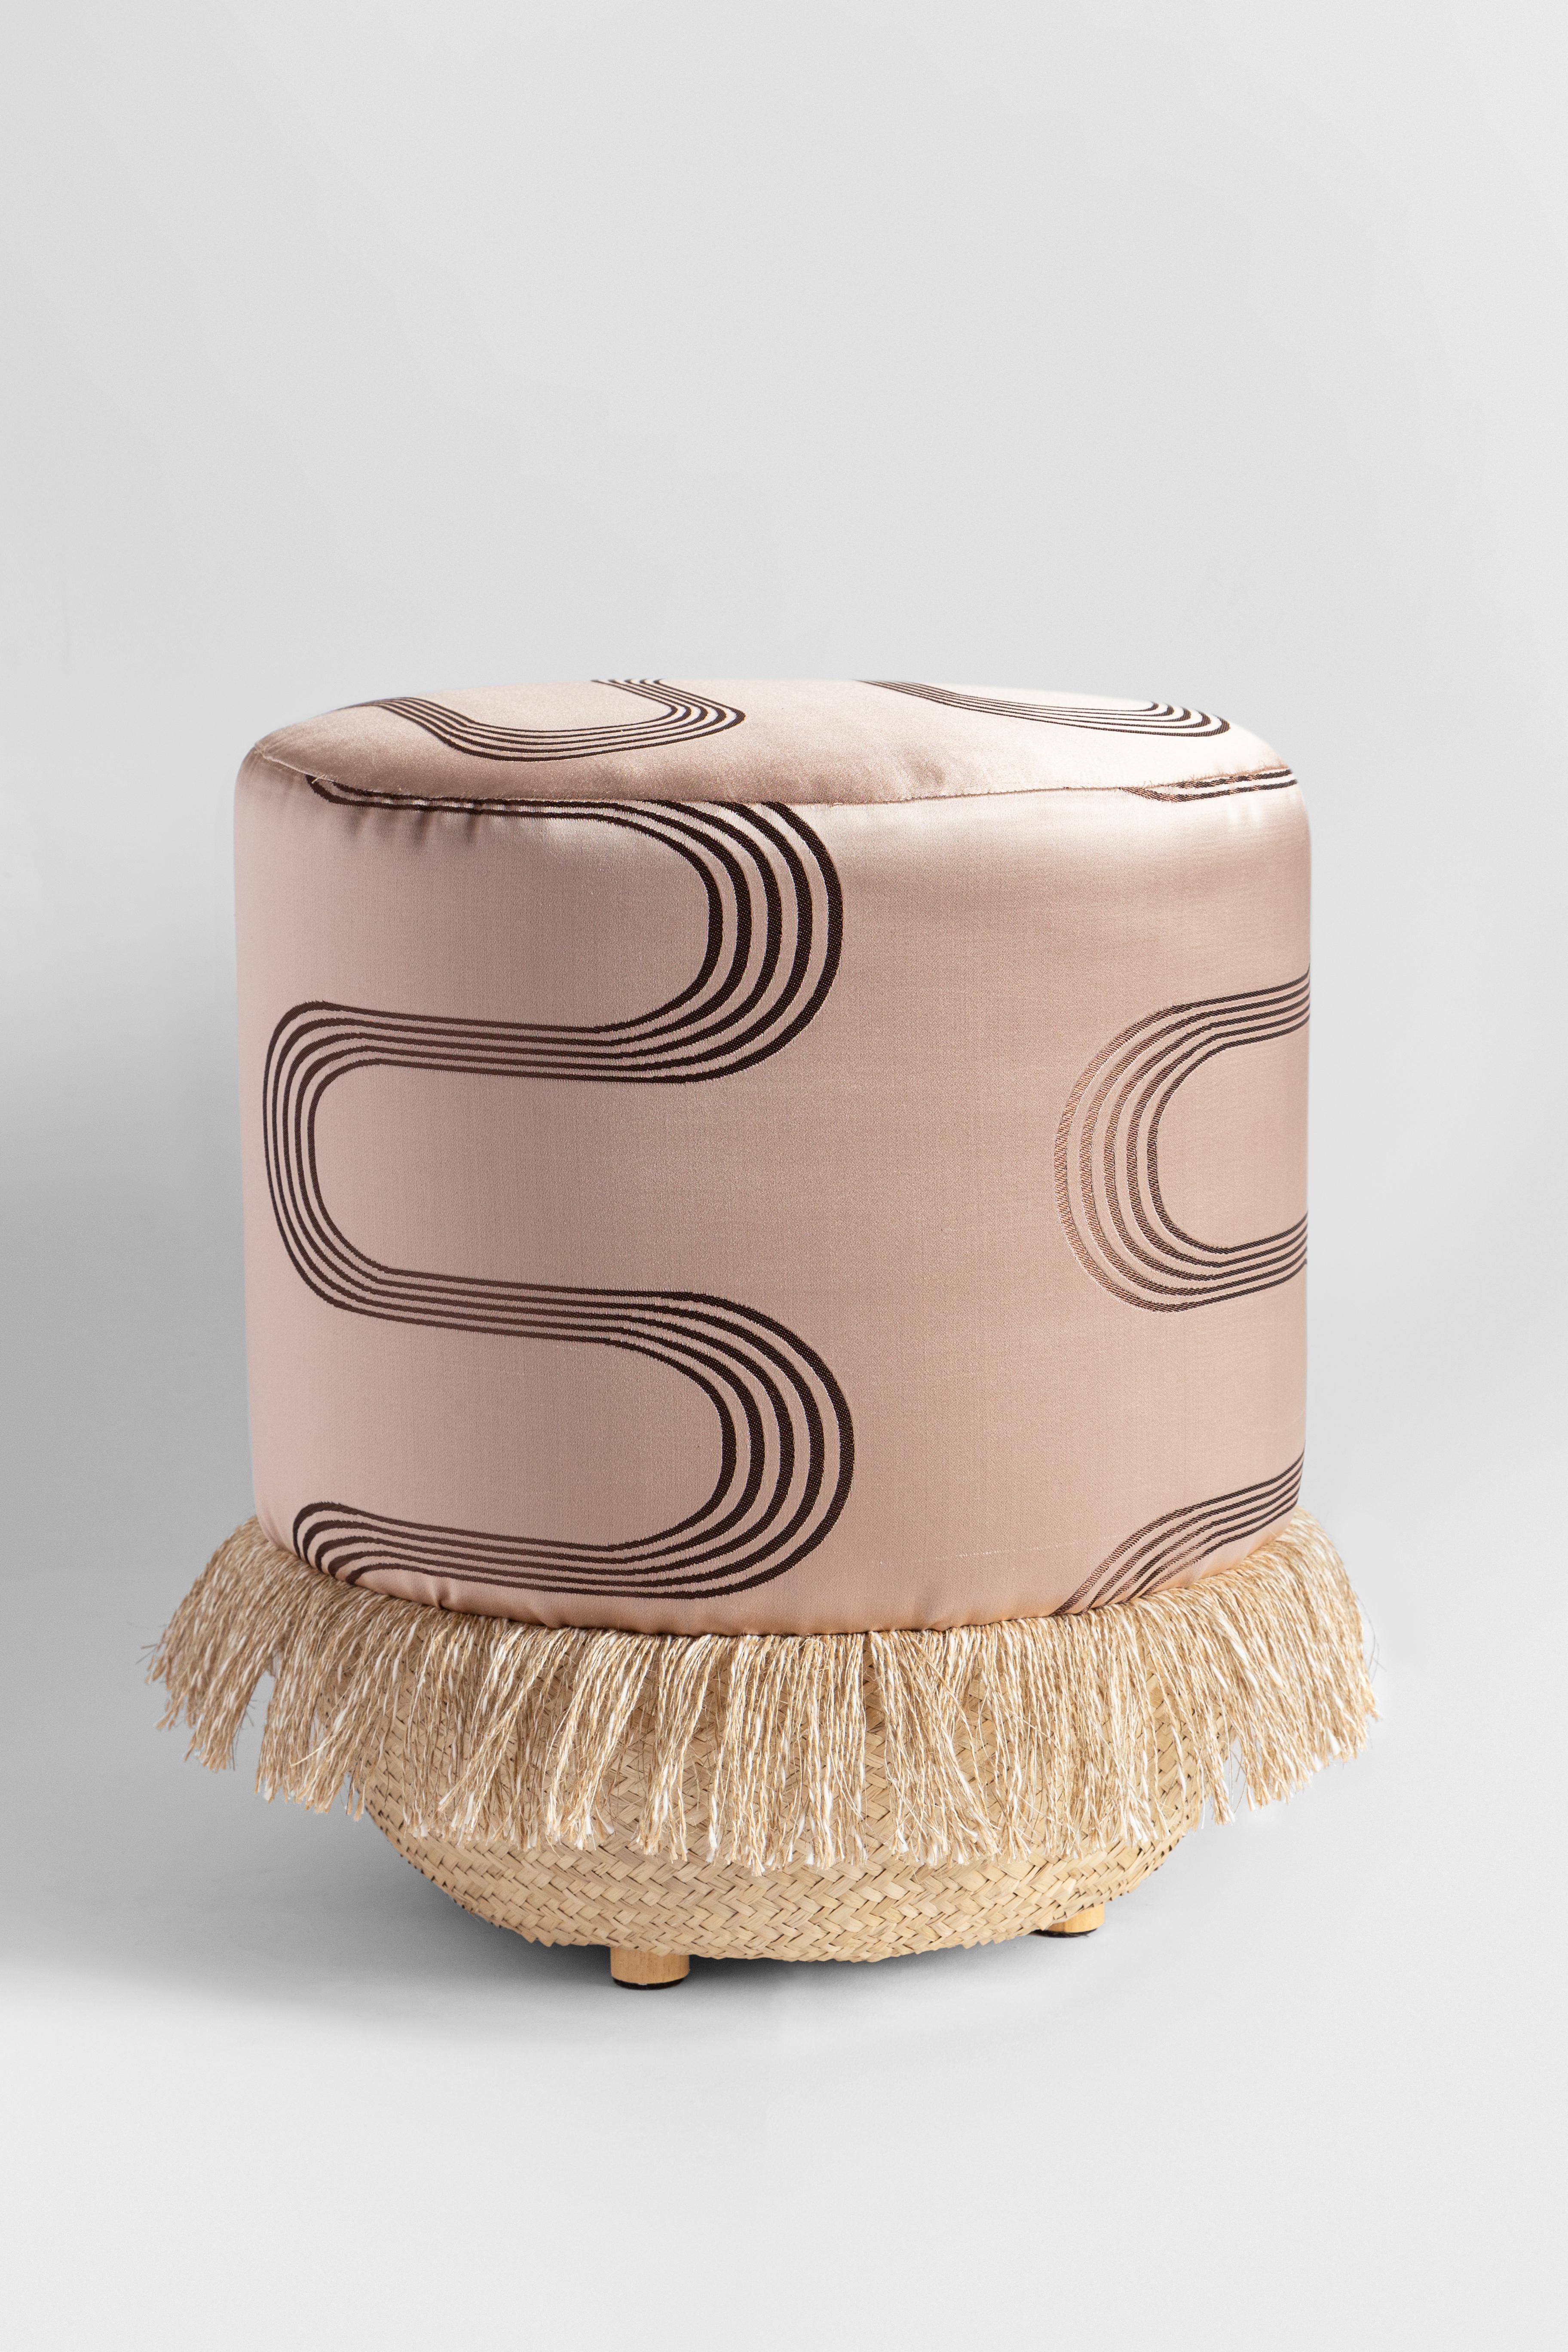 A rose-gold pouf is never the wrong choice for your interior. This one is particularly fitting because of the wavy lines which adorn the shiny silk, which give the surface a dynamic feel. The bottom is distinctive thanks to the cotton fringes that